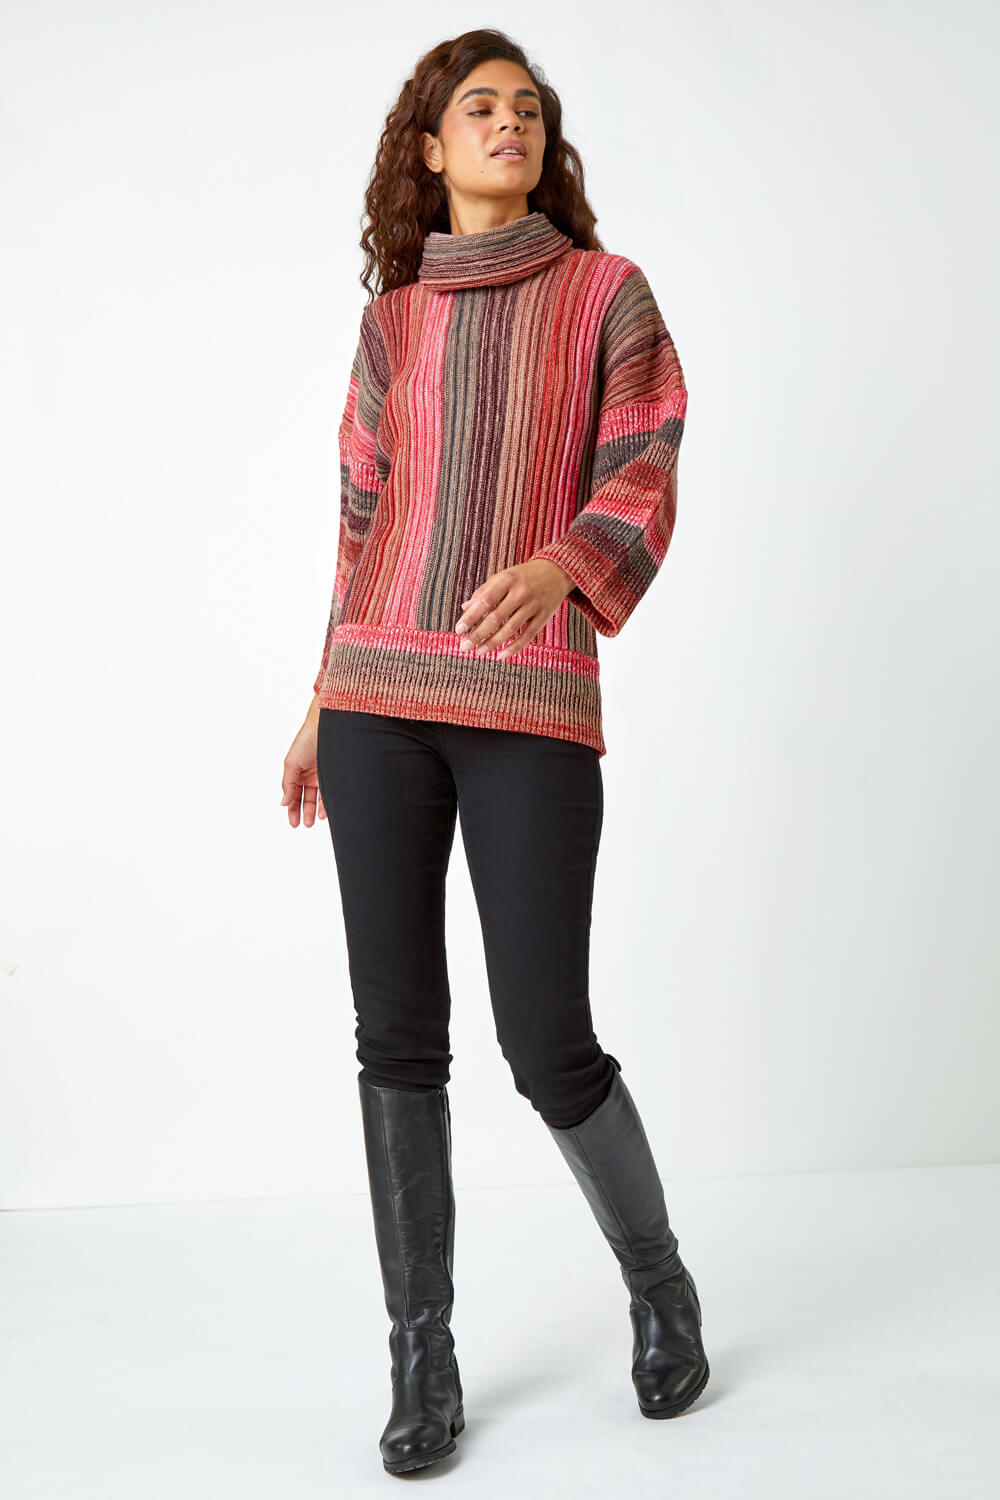 Rust Textured Roll Neck Ombre Knitted Jumper | Roman UK